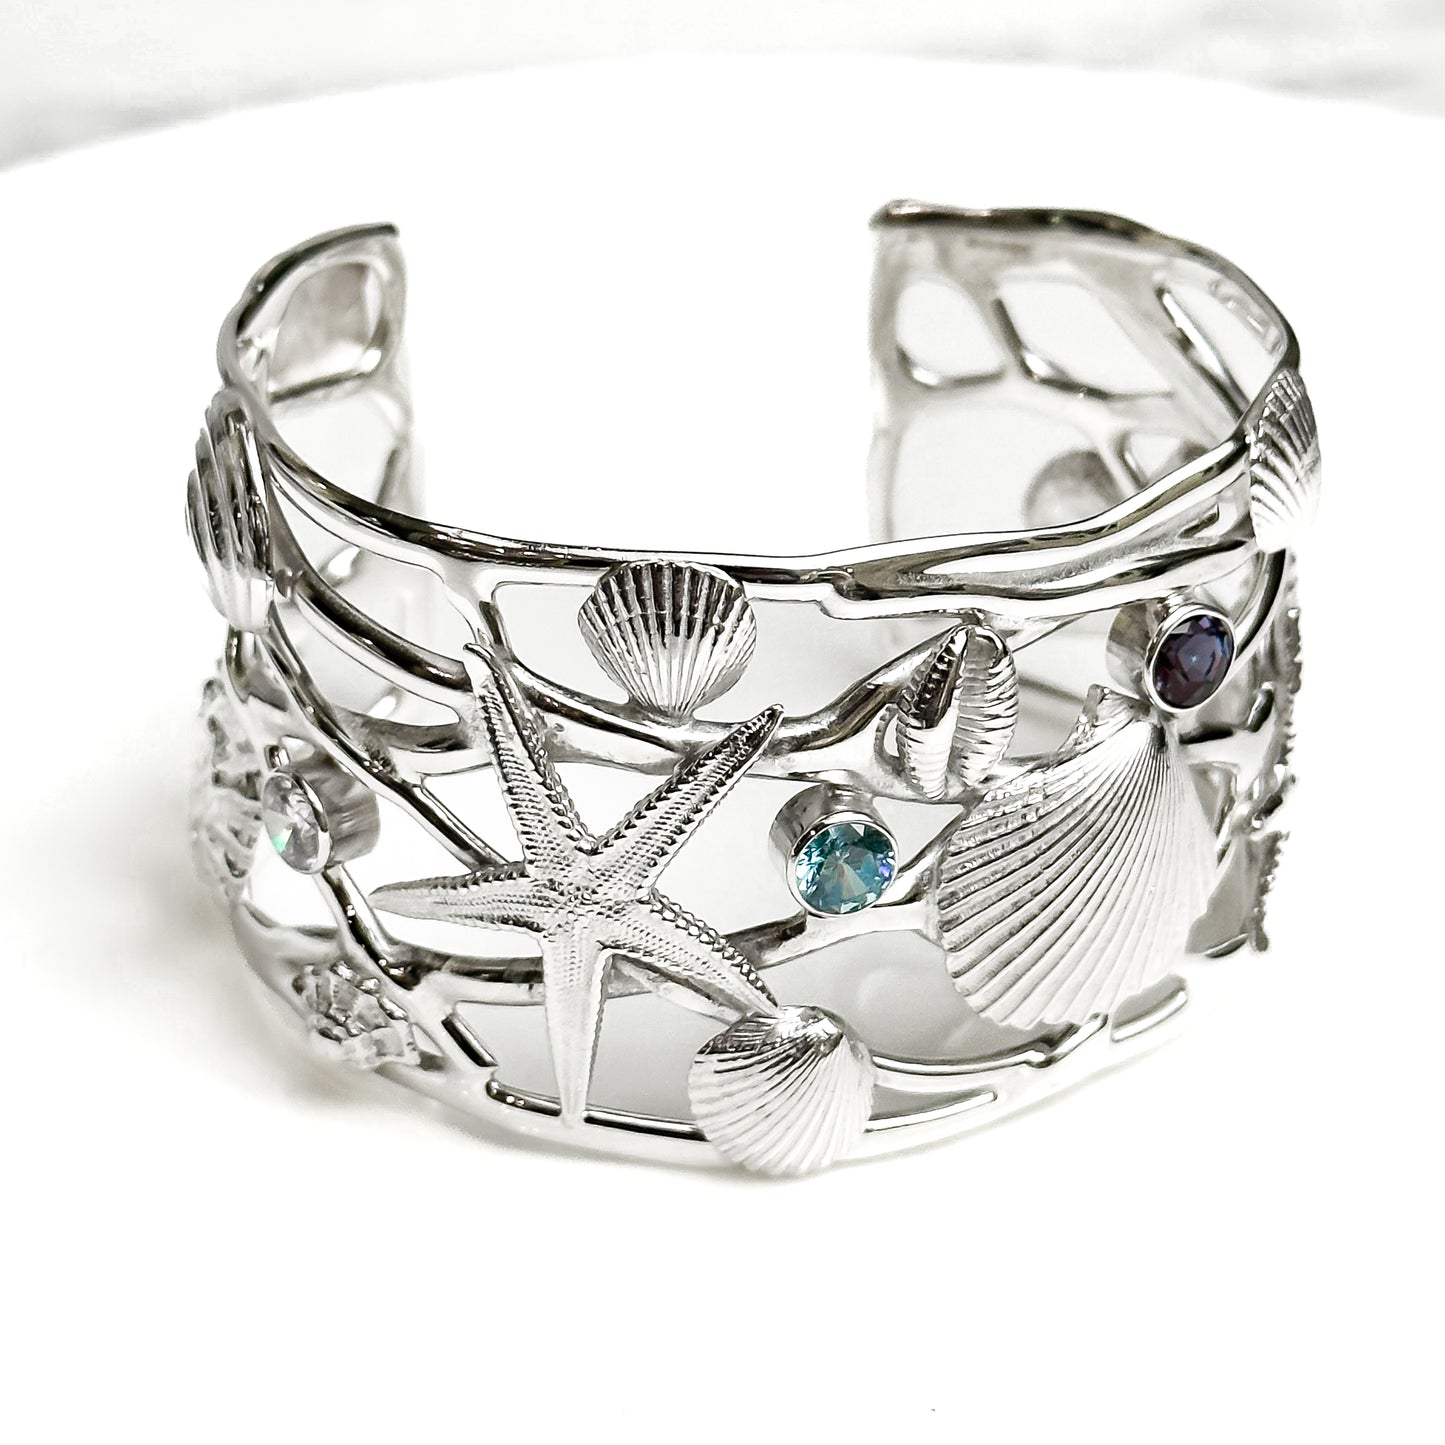 Ocean Wave Sterling Silver Shell and Gemstone Cuff Bangle